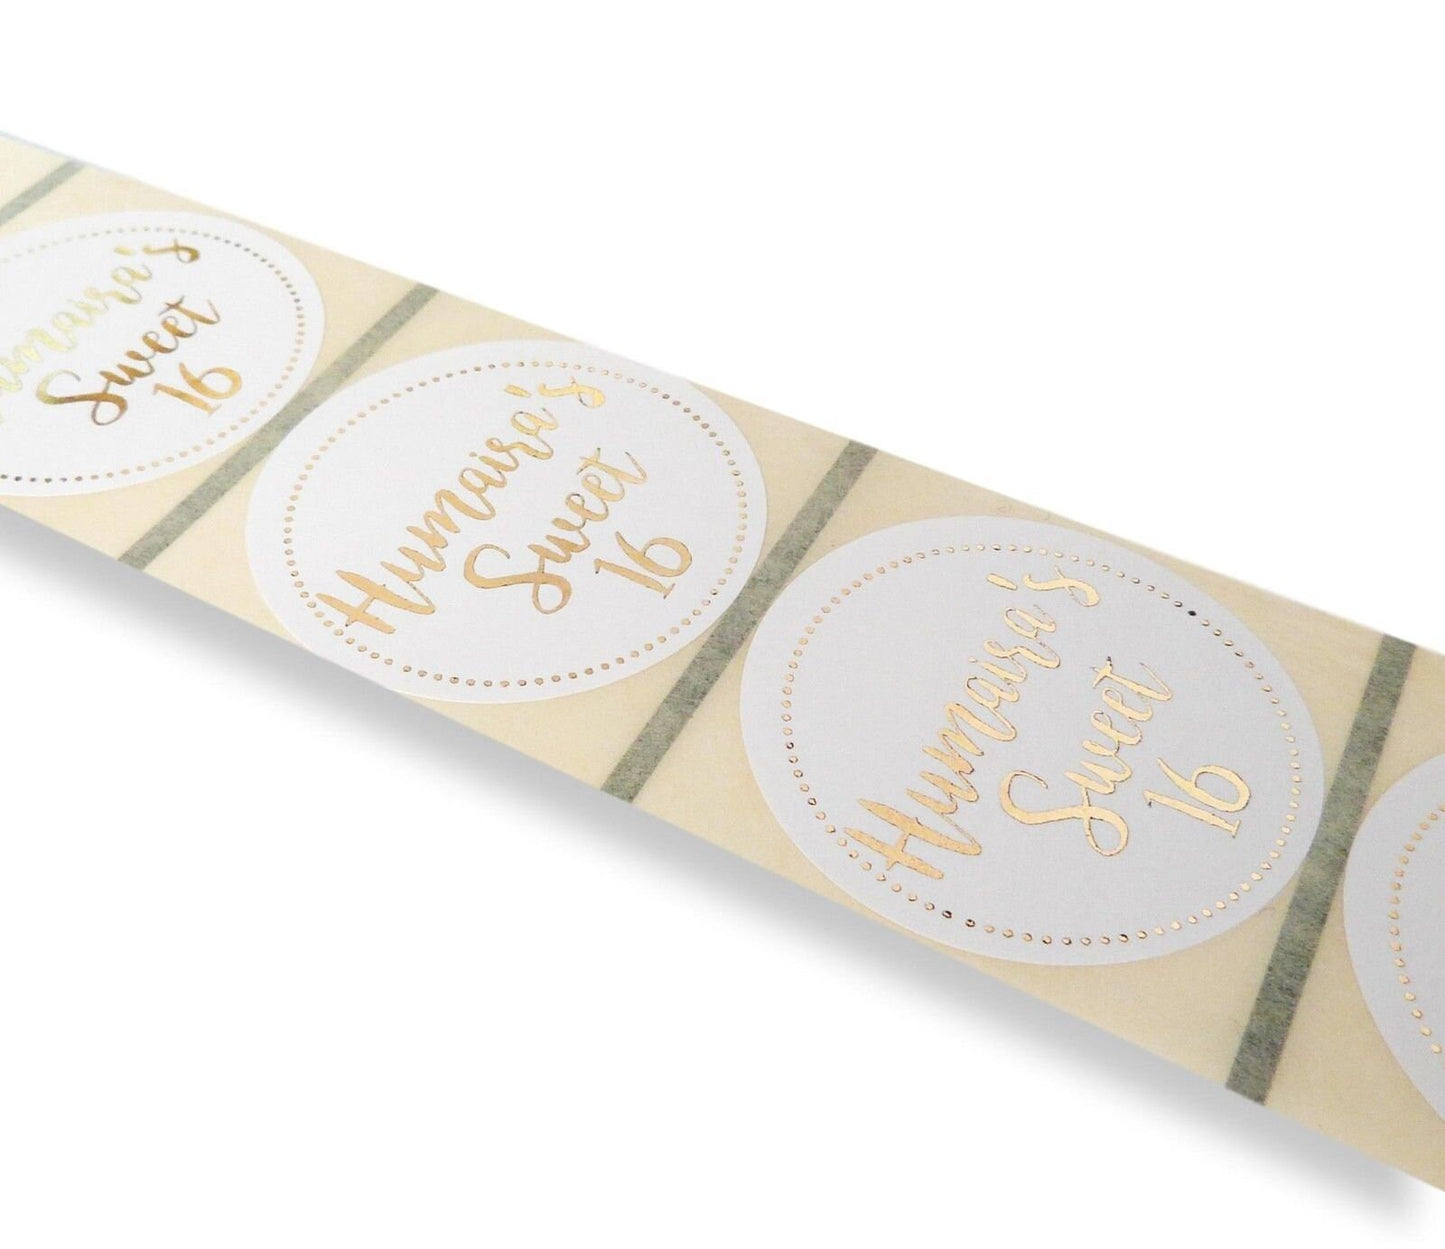 50 x 45mm white personalised sweet 16 labels gold foil party stickers